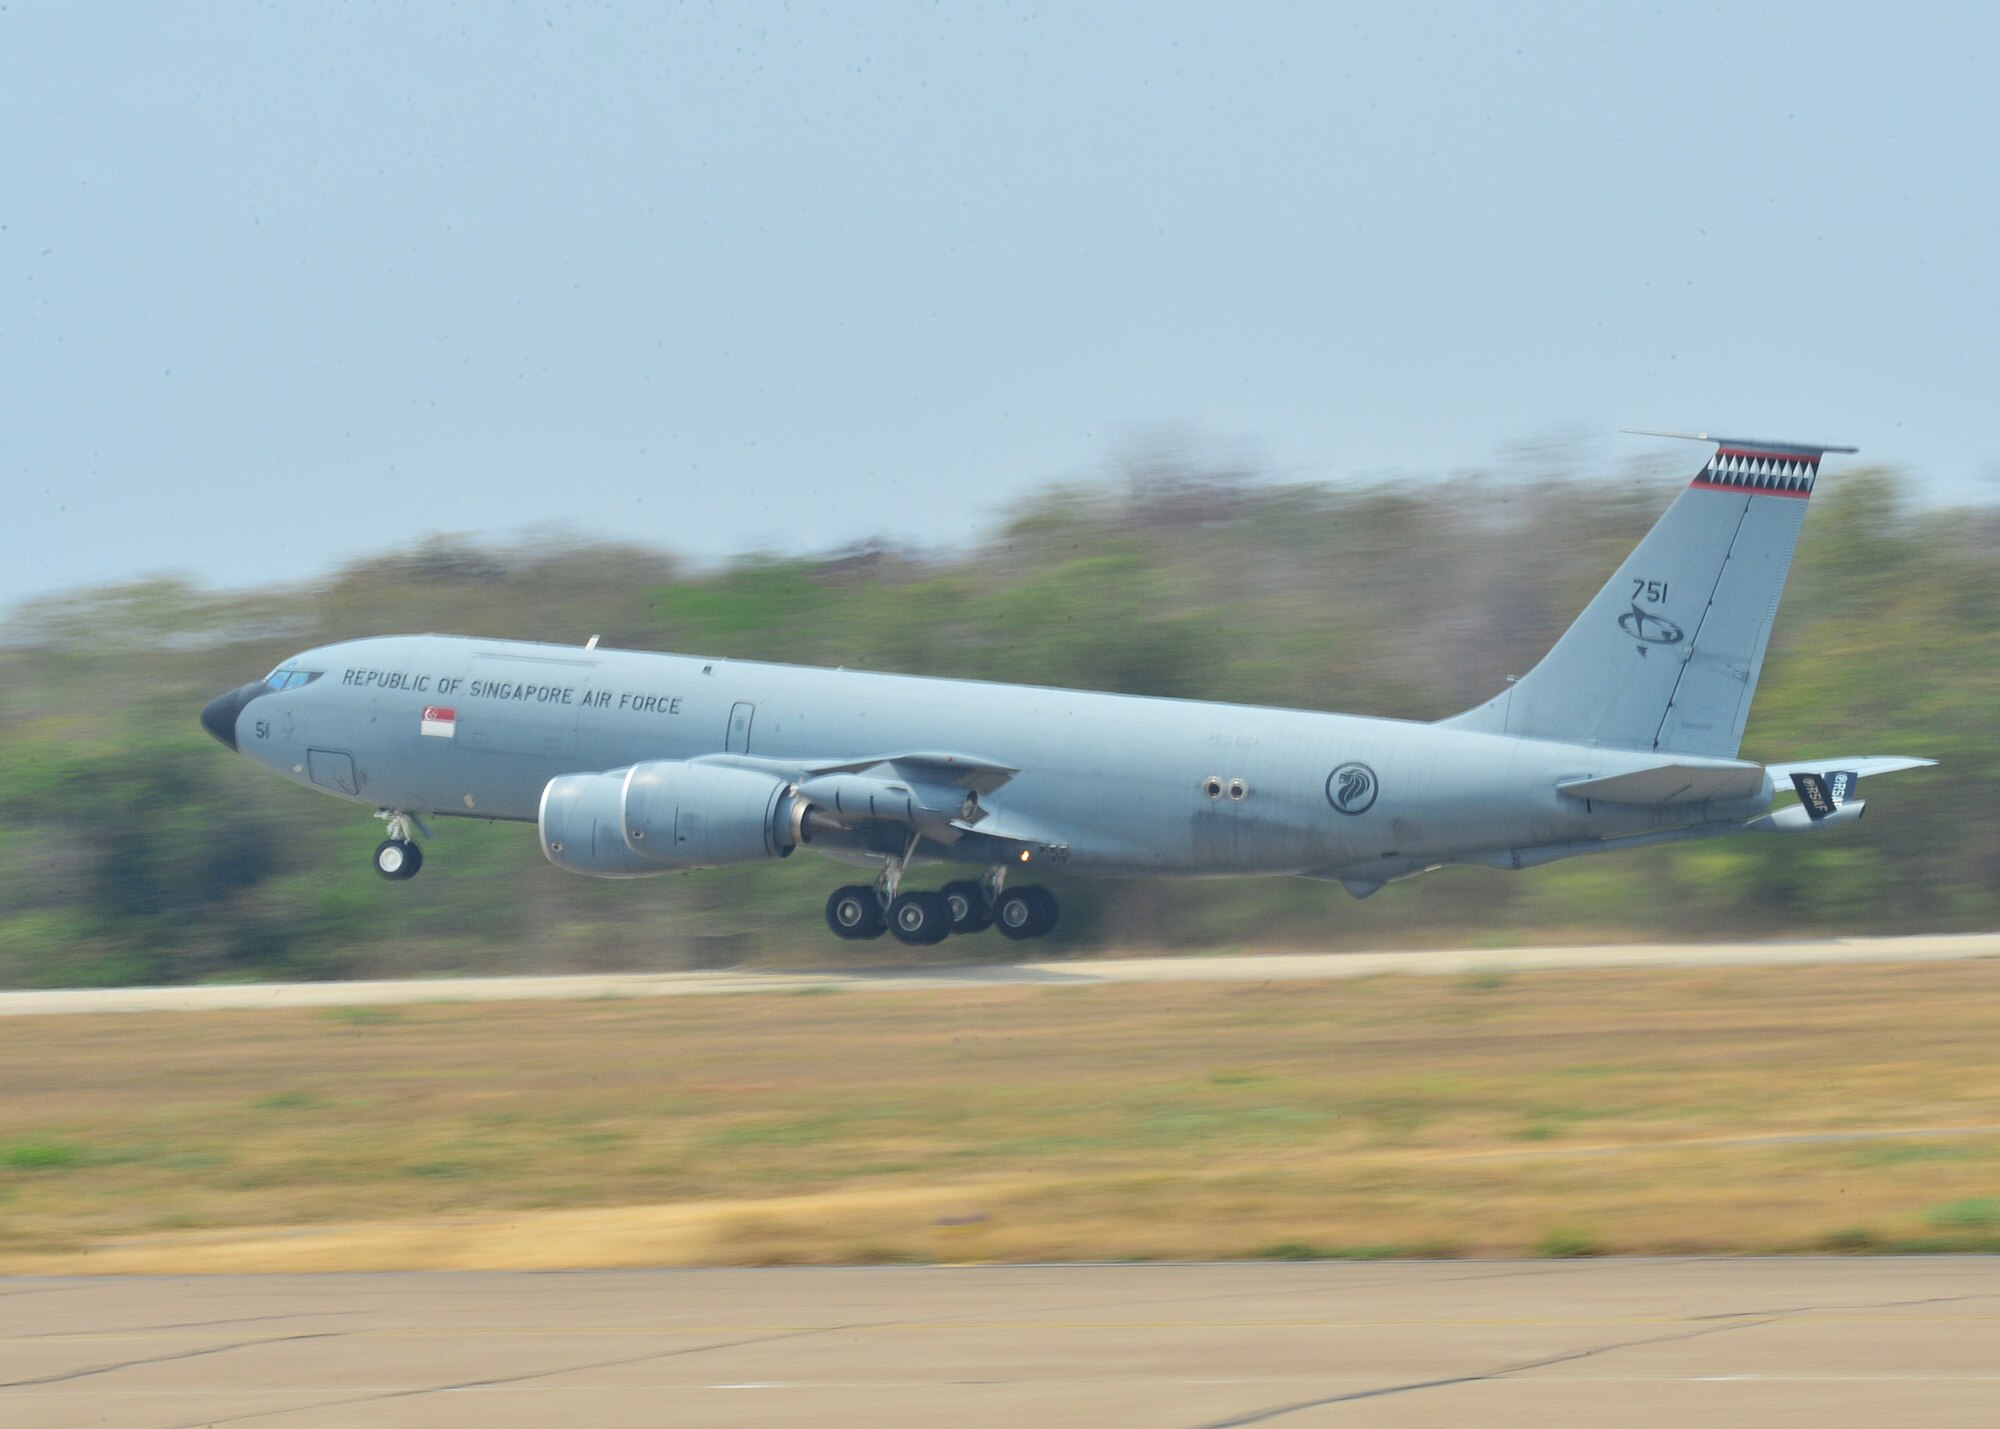 A Republic of Singapore Air Force KC-135 takes off during Exercise Cope Tiger 16, on Korat Royal Thai Air Force Base, Thailand, March 7, 2016. Exercise Cope Tiger 16 includes over 1,200 personnel from three countries and continues the growth of strong, interoperable and beneficial relationships within the Asia-Pacific Region, while demonstrating U.S. capability to project forces strategically in a combined, joint environment. (U.S. Air Force Photo by Tech Sgt. Aaron Oelrich/Released)